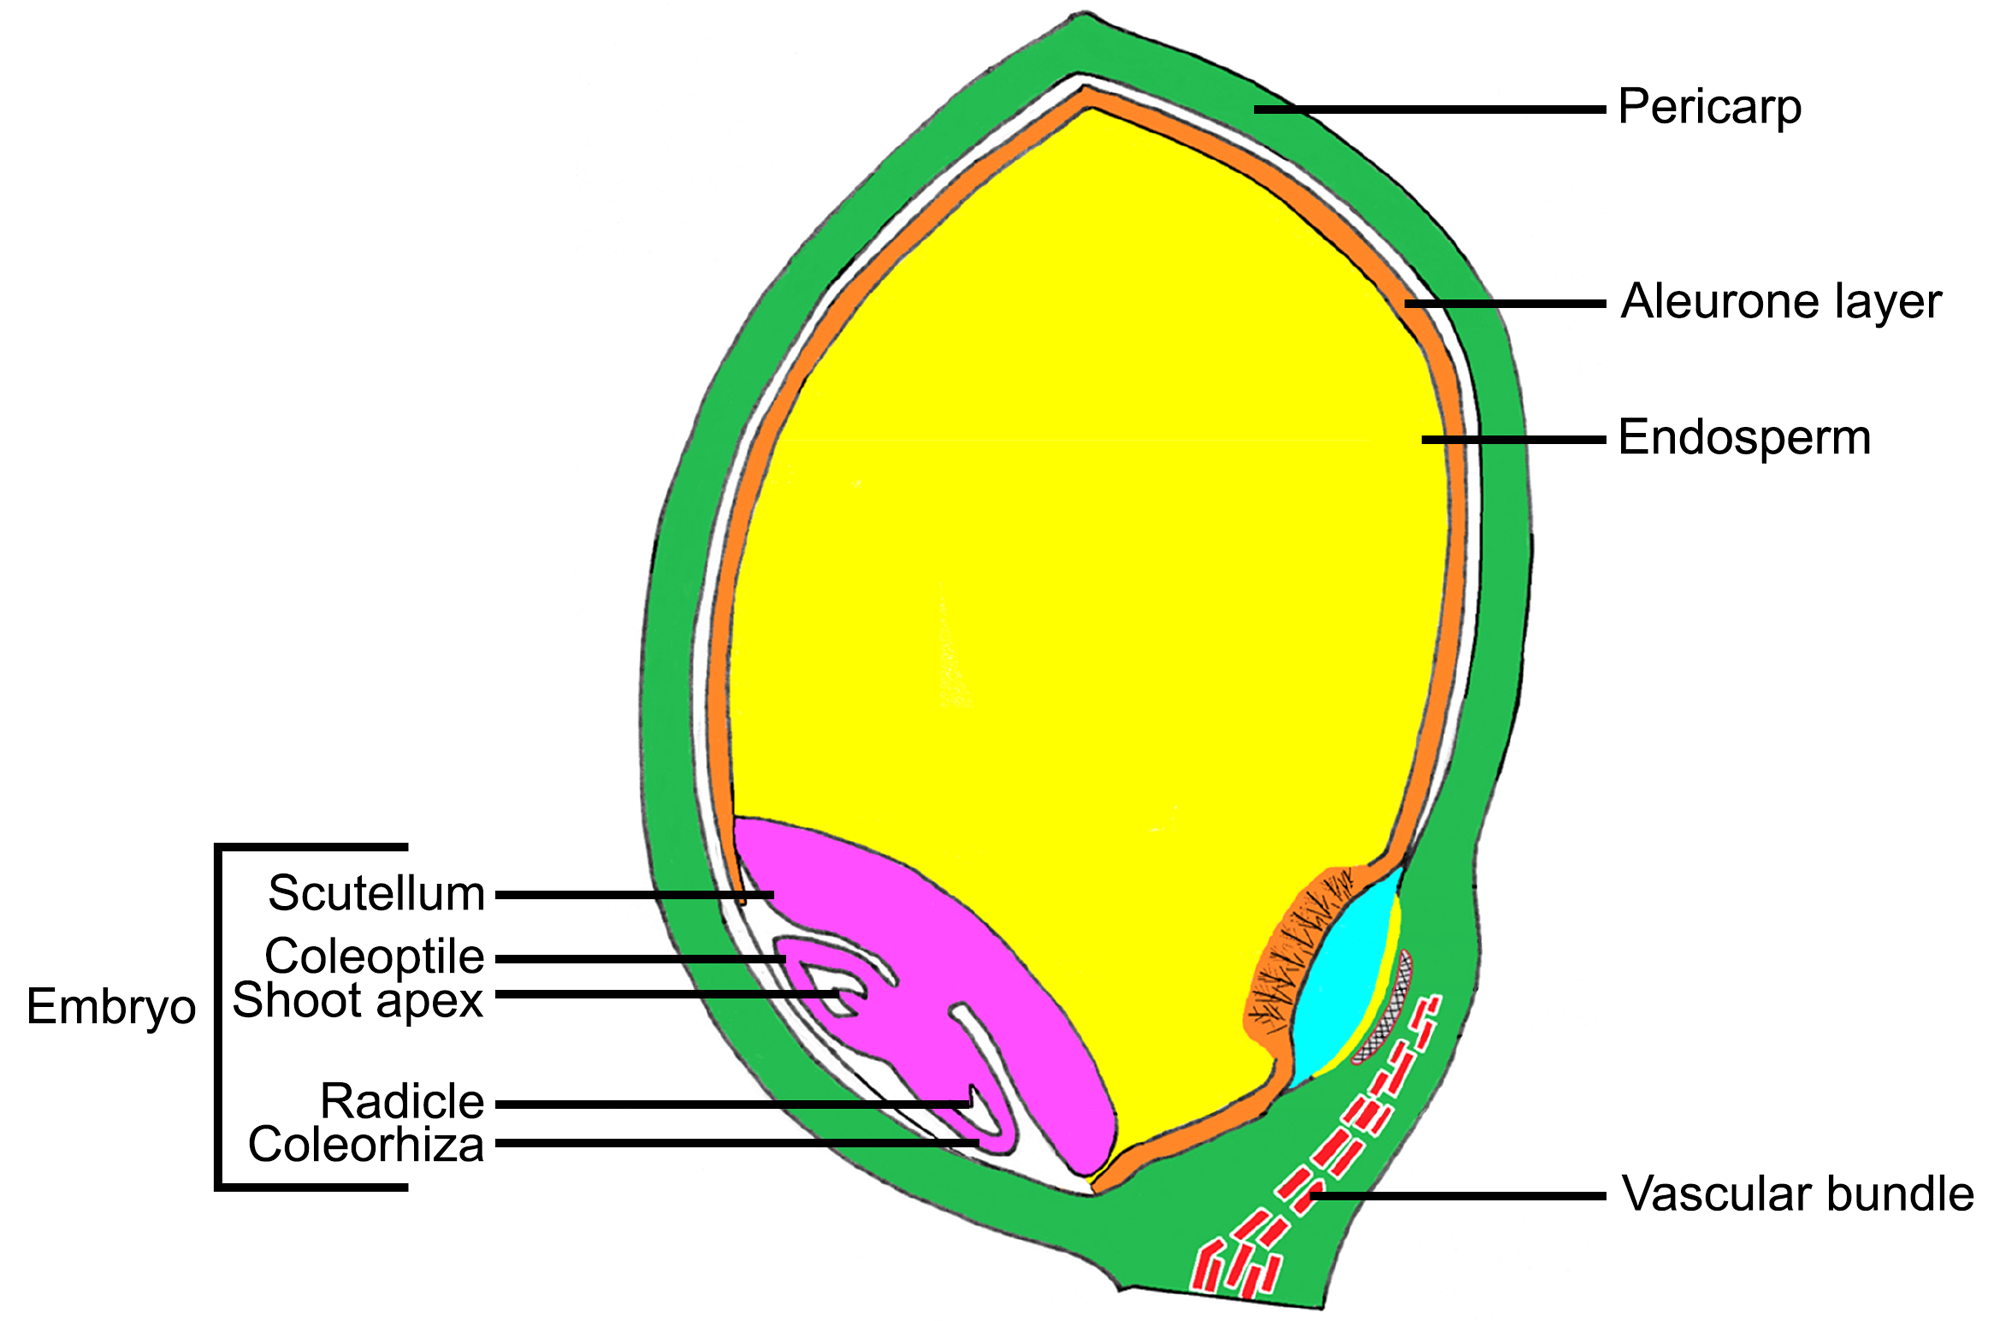 Diagram of a longitudinal section of a caryopsis of sorghum showing the embryo and endosperm. On the embryo, the scutellum, coleoptile, shoot apex, radicle, and coleorhiza are labeled. The endosperm, aleurone layer, pericarp, and. a vascular bundle entering the base of the caryopsis are also labeled.